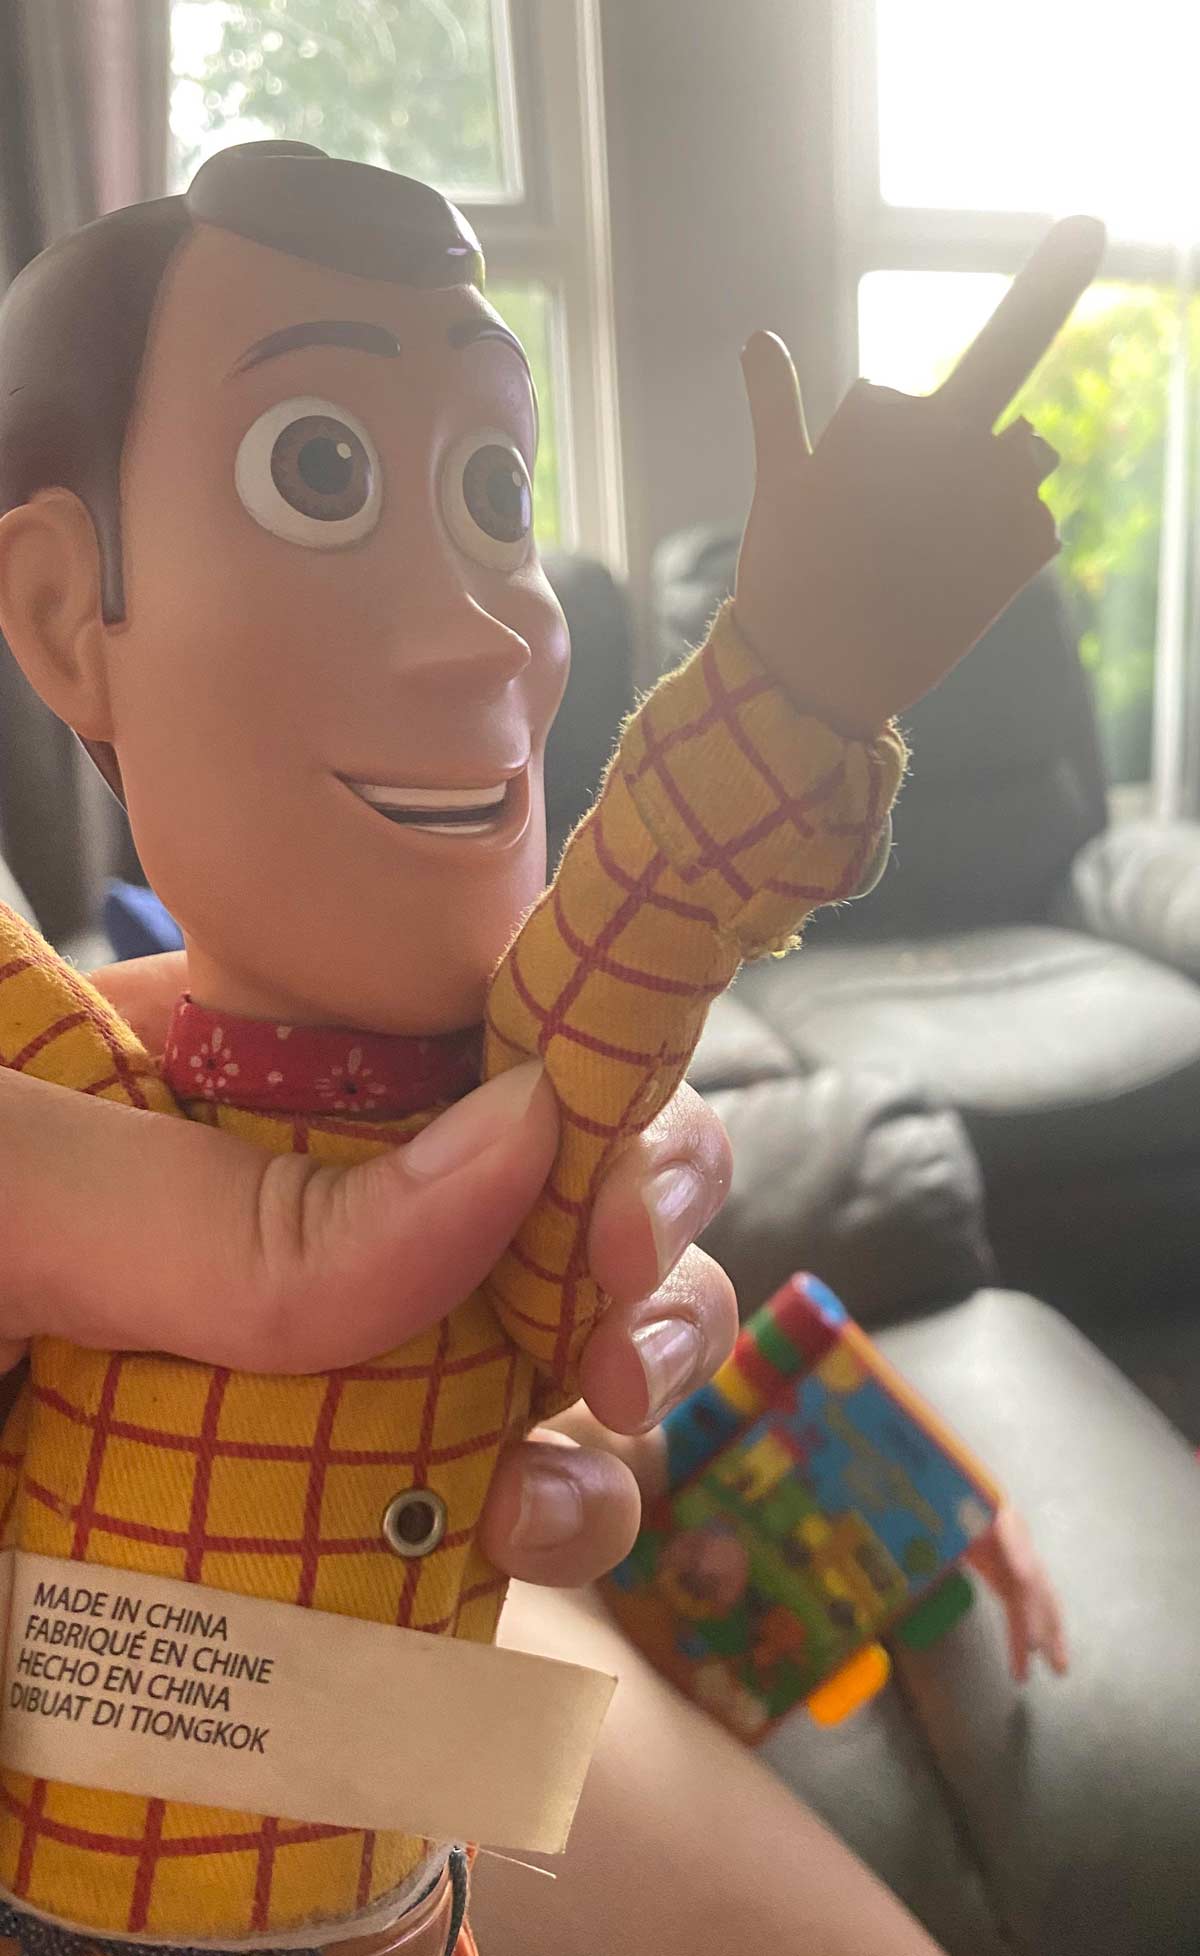 My toddlers have bit the fingers off Woody and now he’s permanently giving the finger